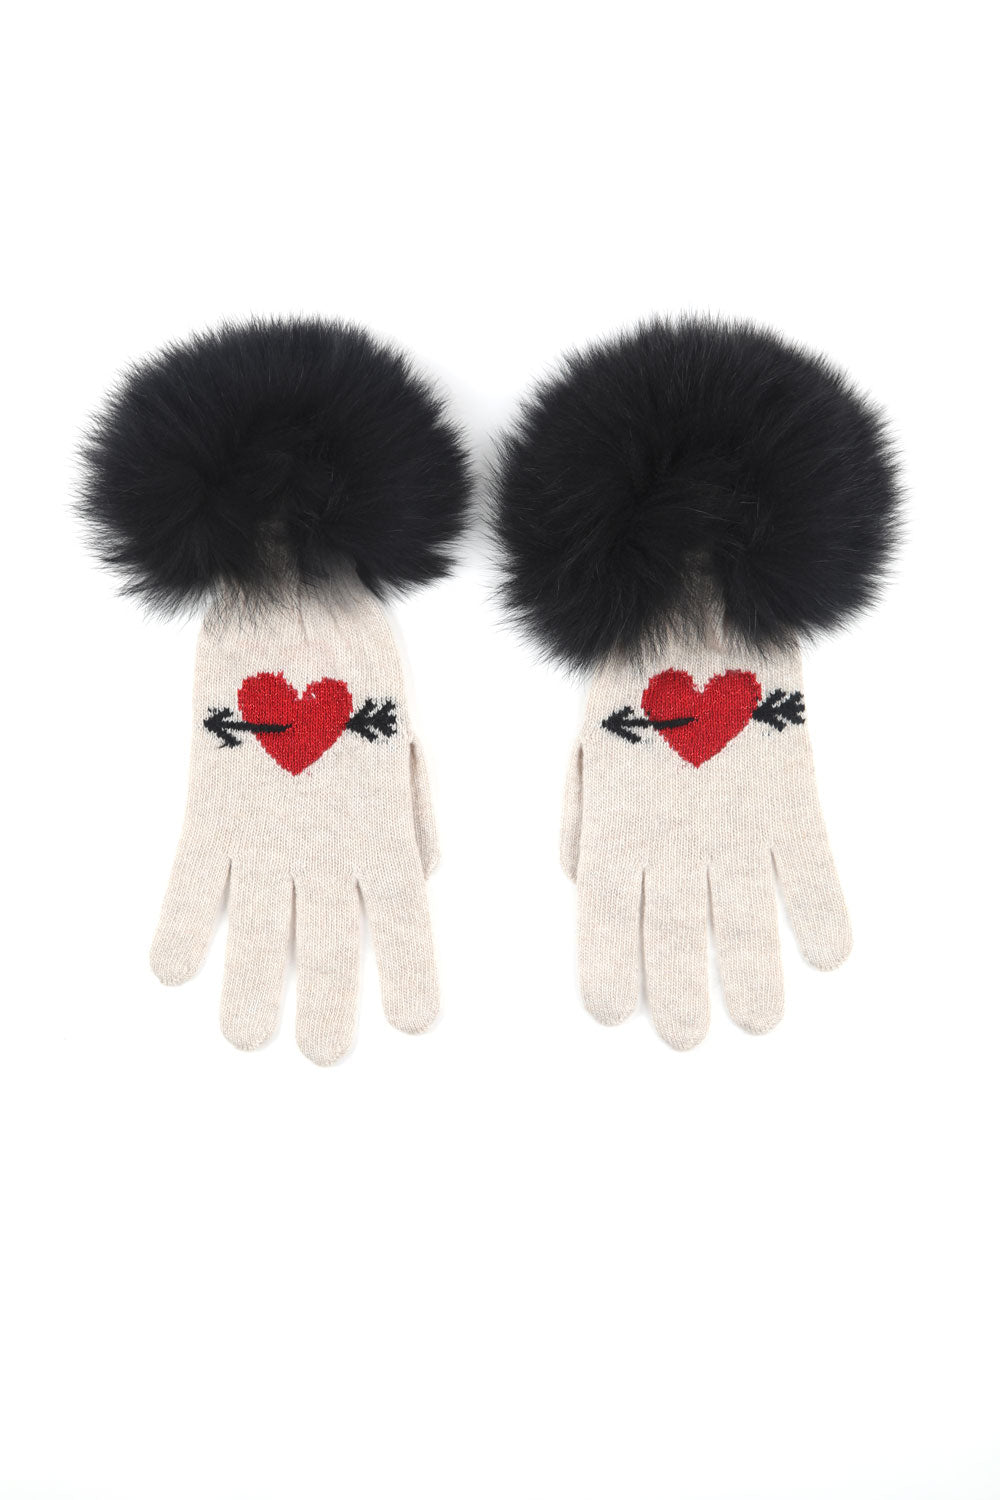 Boutique Moschino Wool & Cashmere Gloves with Fox Fur